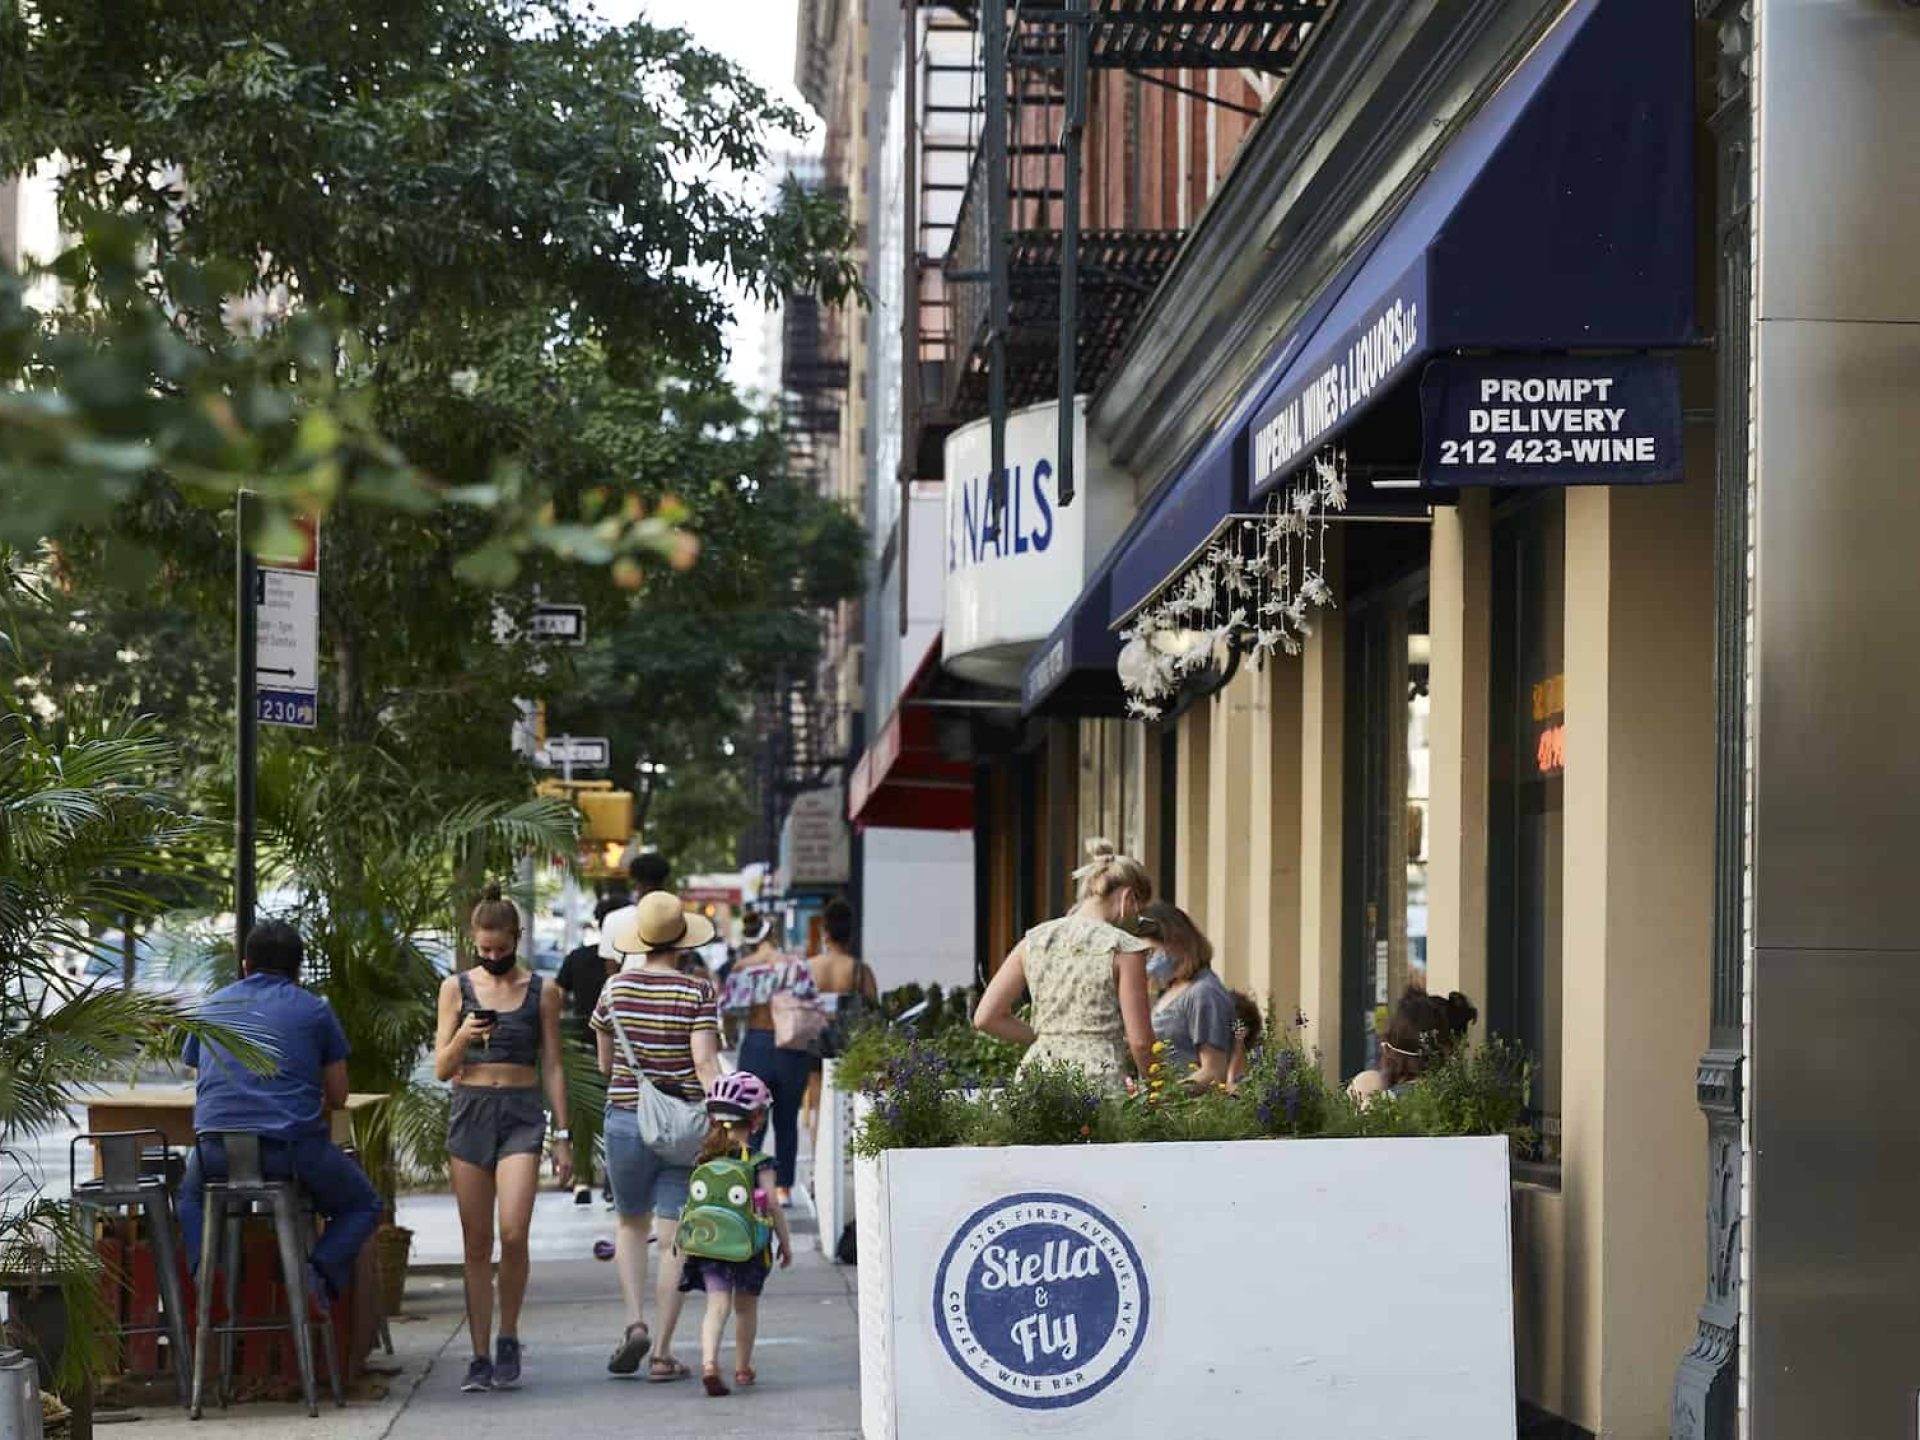 Exterior of the restaurant Stella & Fly in New York with a blue awning, outdoor seating and people walking on the sidewalk.